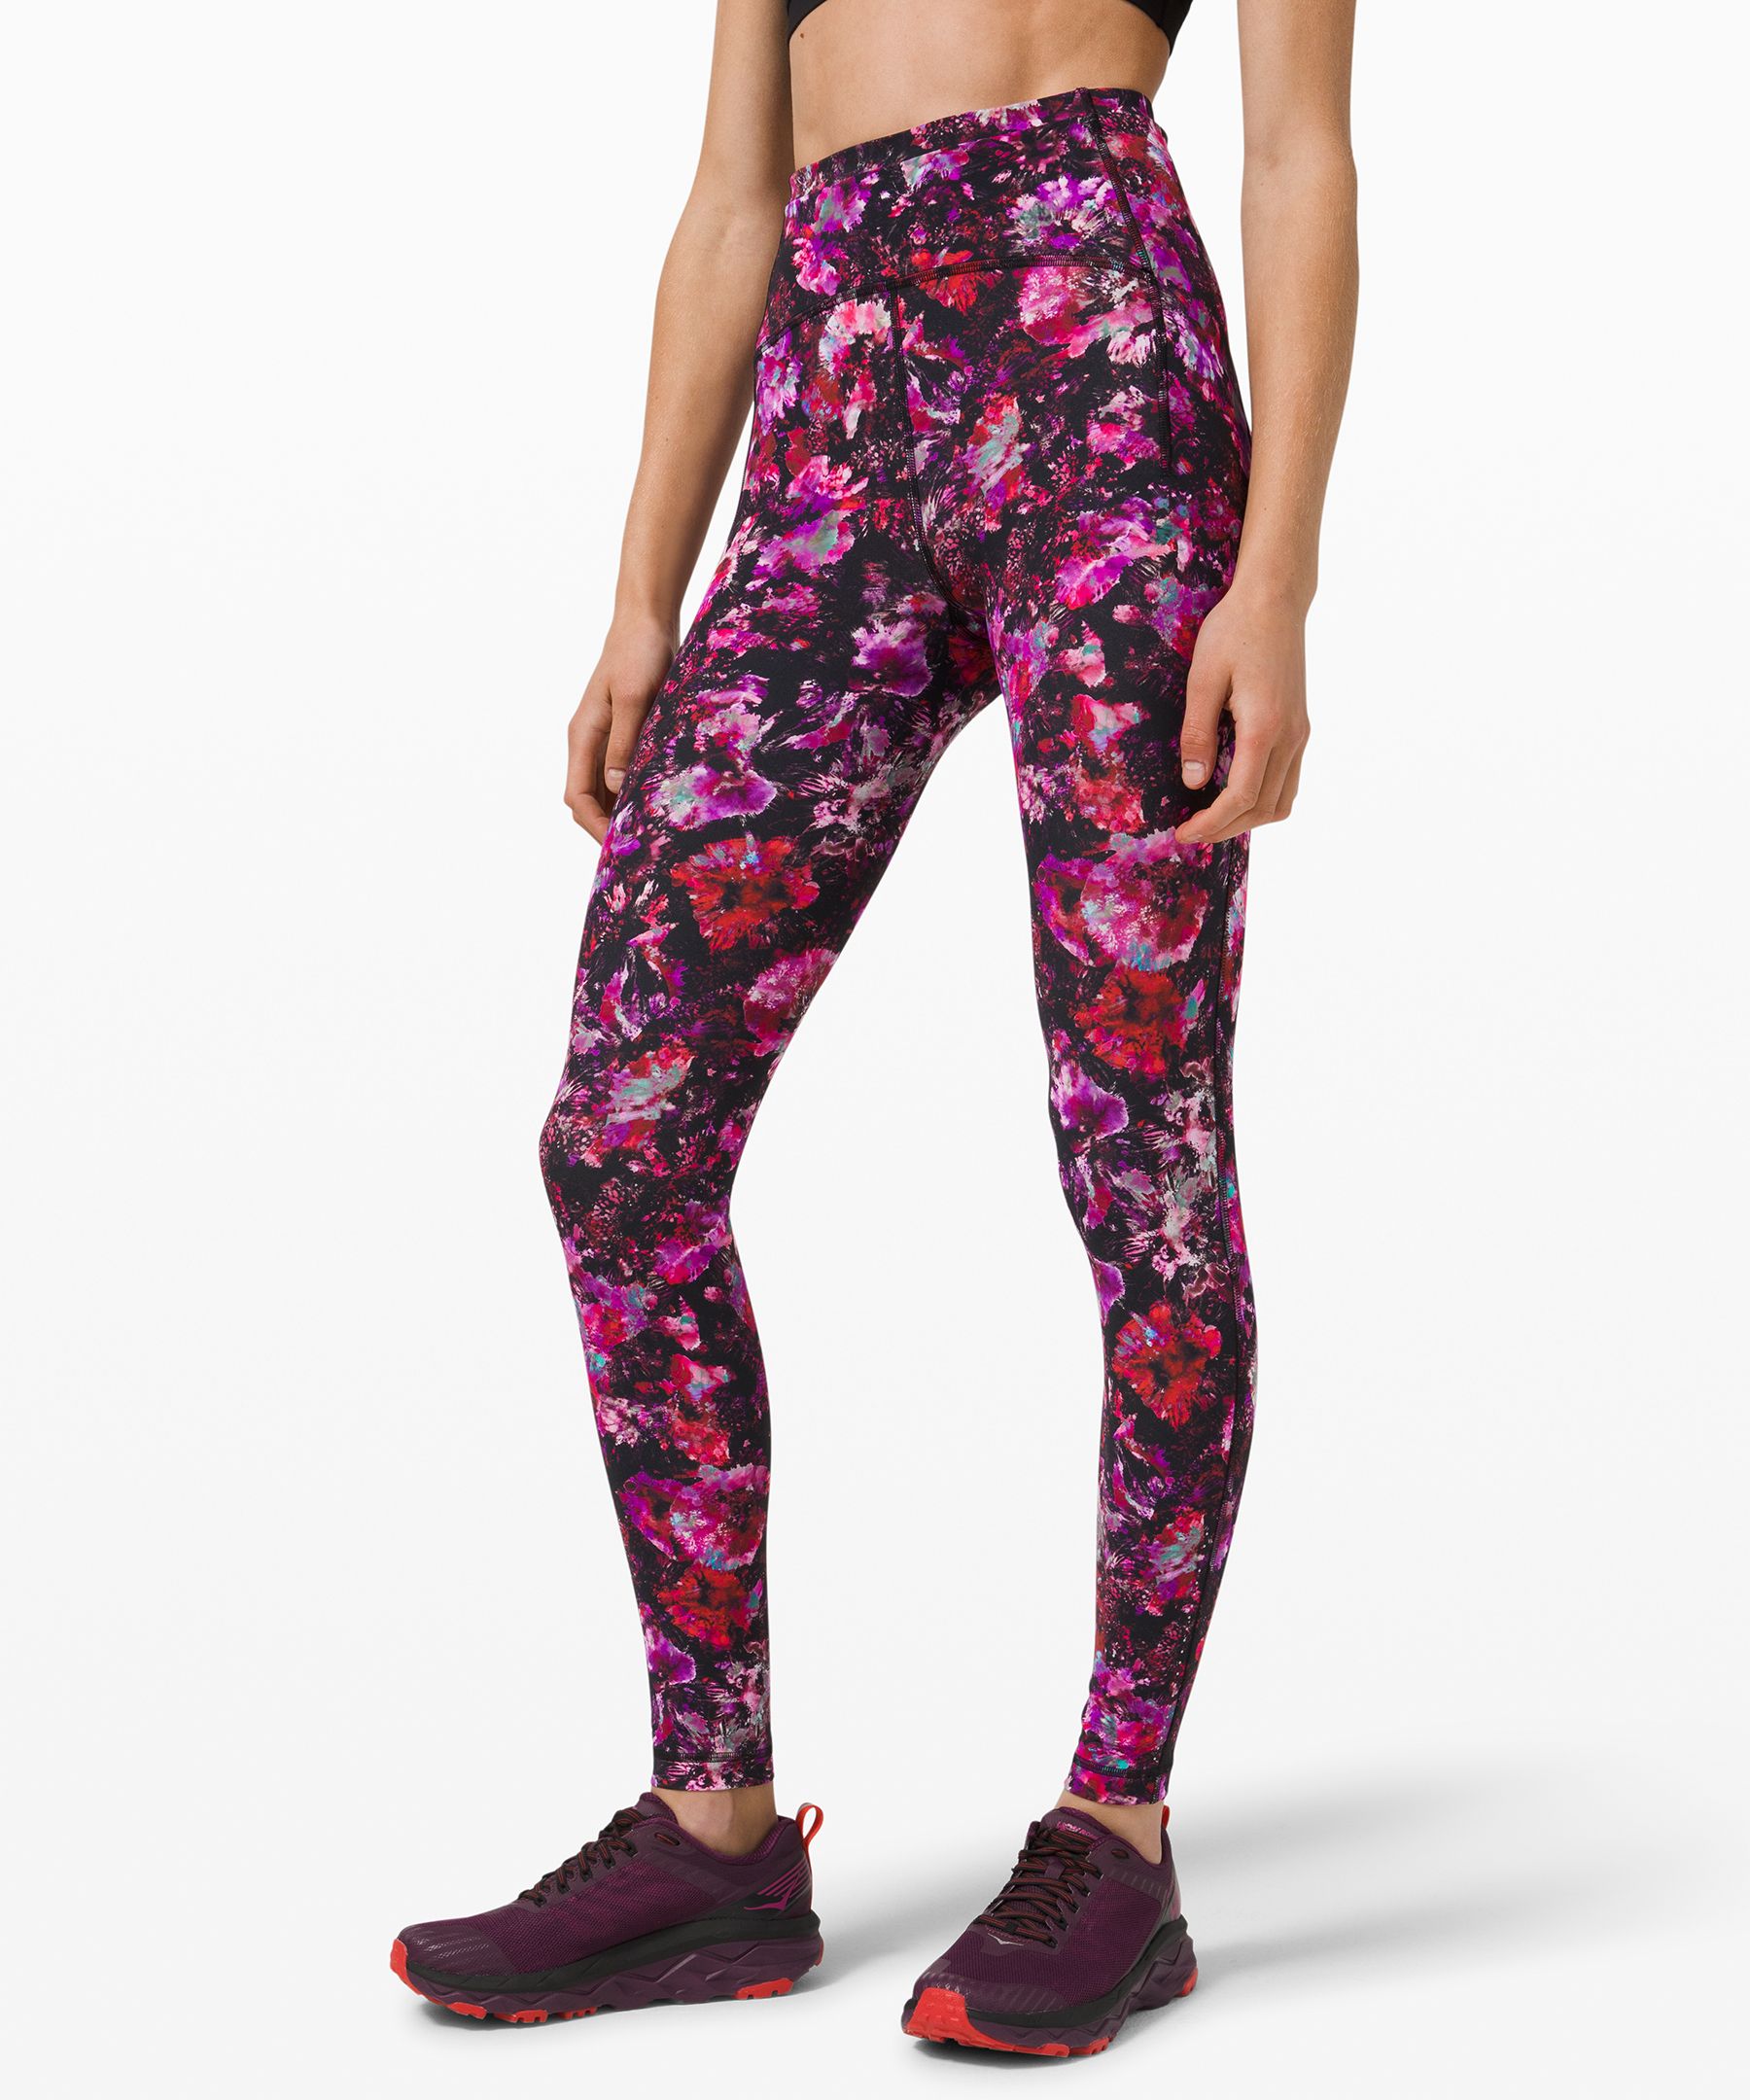 Lululemon Swift Speed High-rise Tights 28" In Fluoro Floral